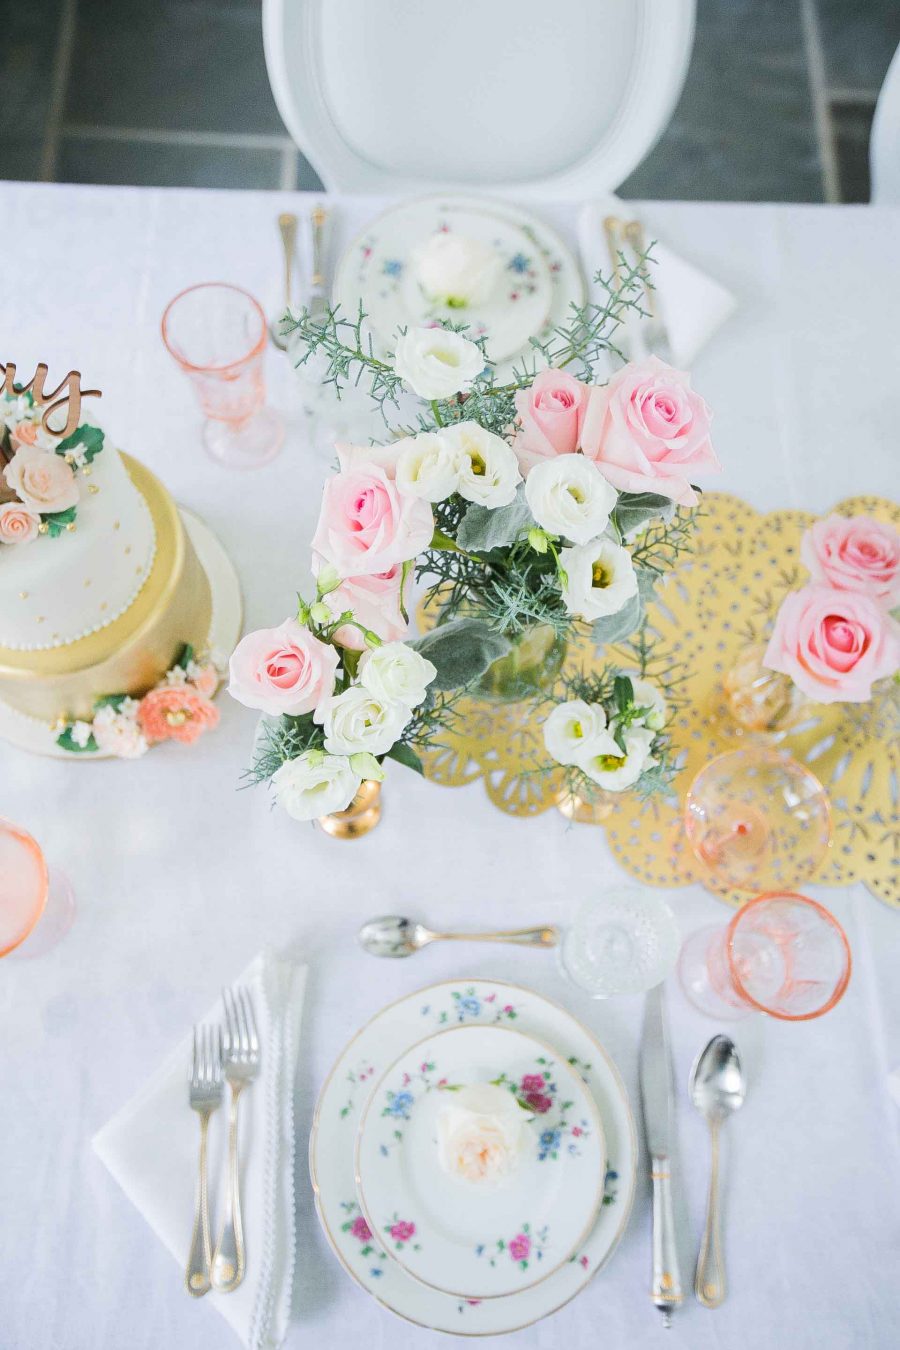 Host a Winter Bridal Shower with BHLDN by FashionableHostess.com23